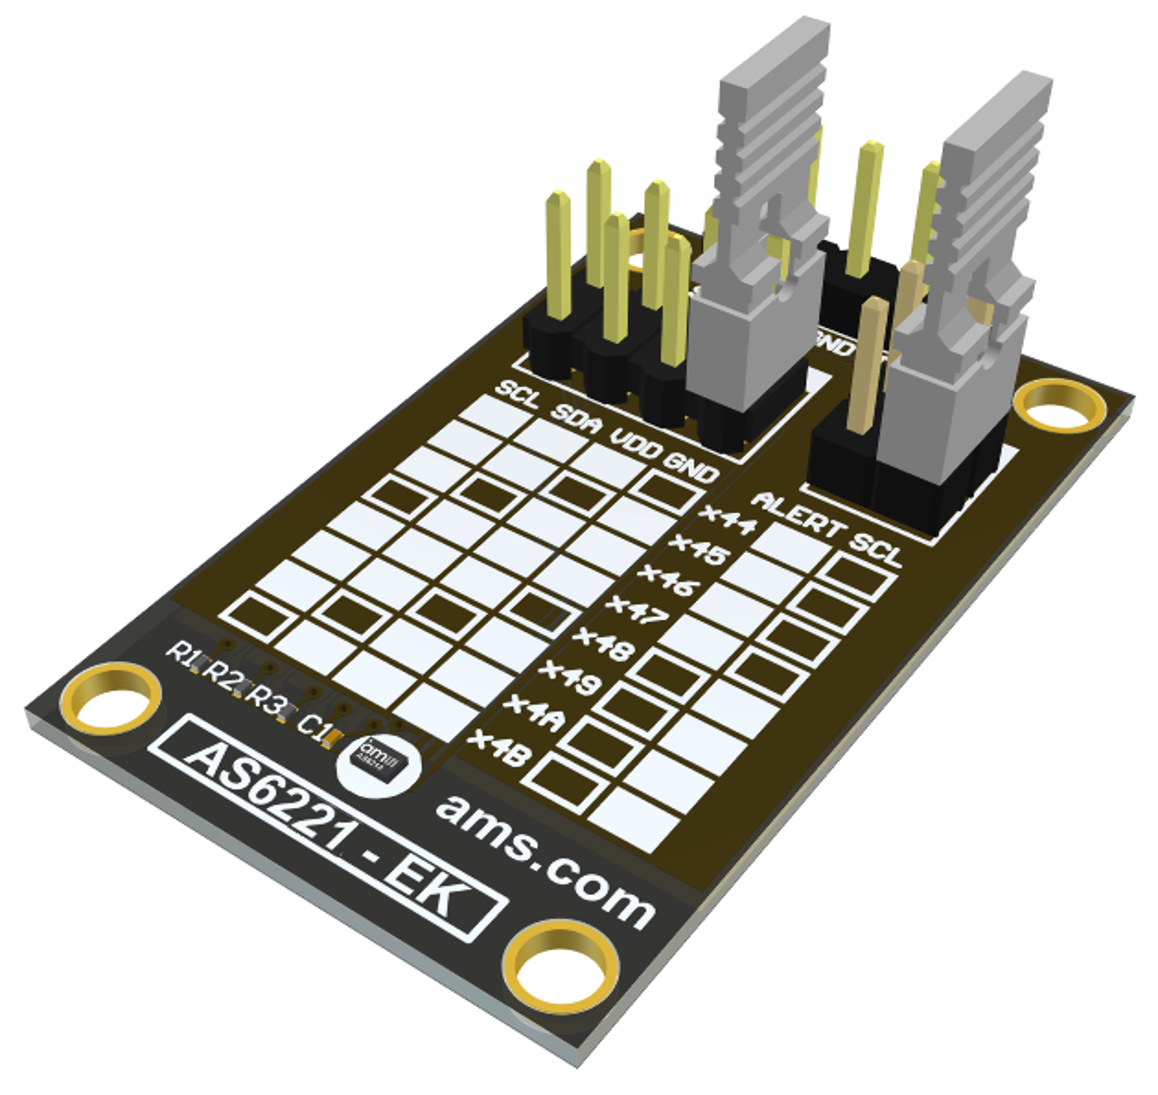 AS6221 Eval Kit Board Picture